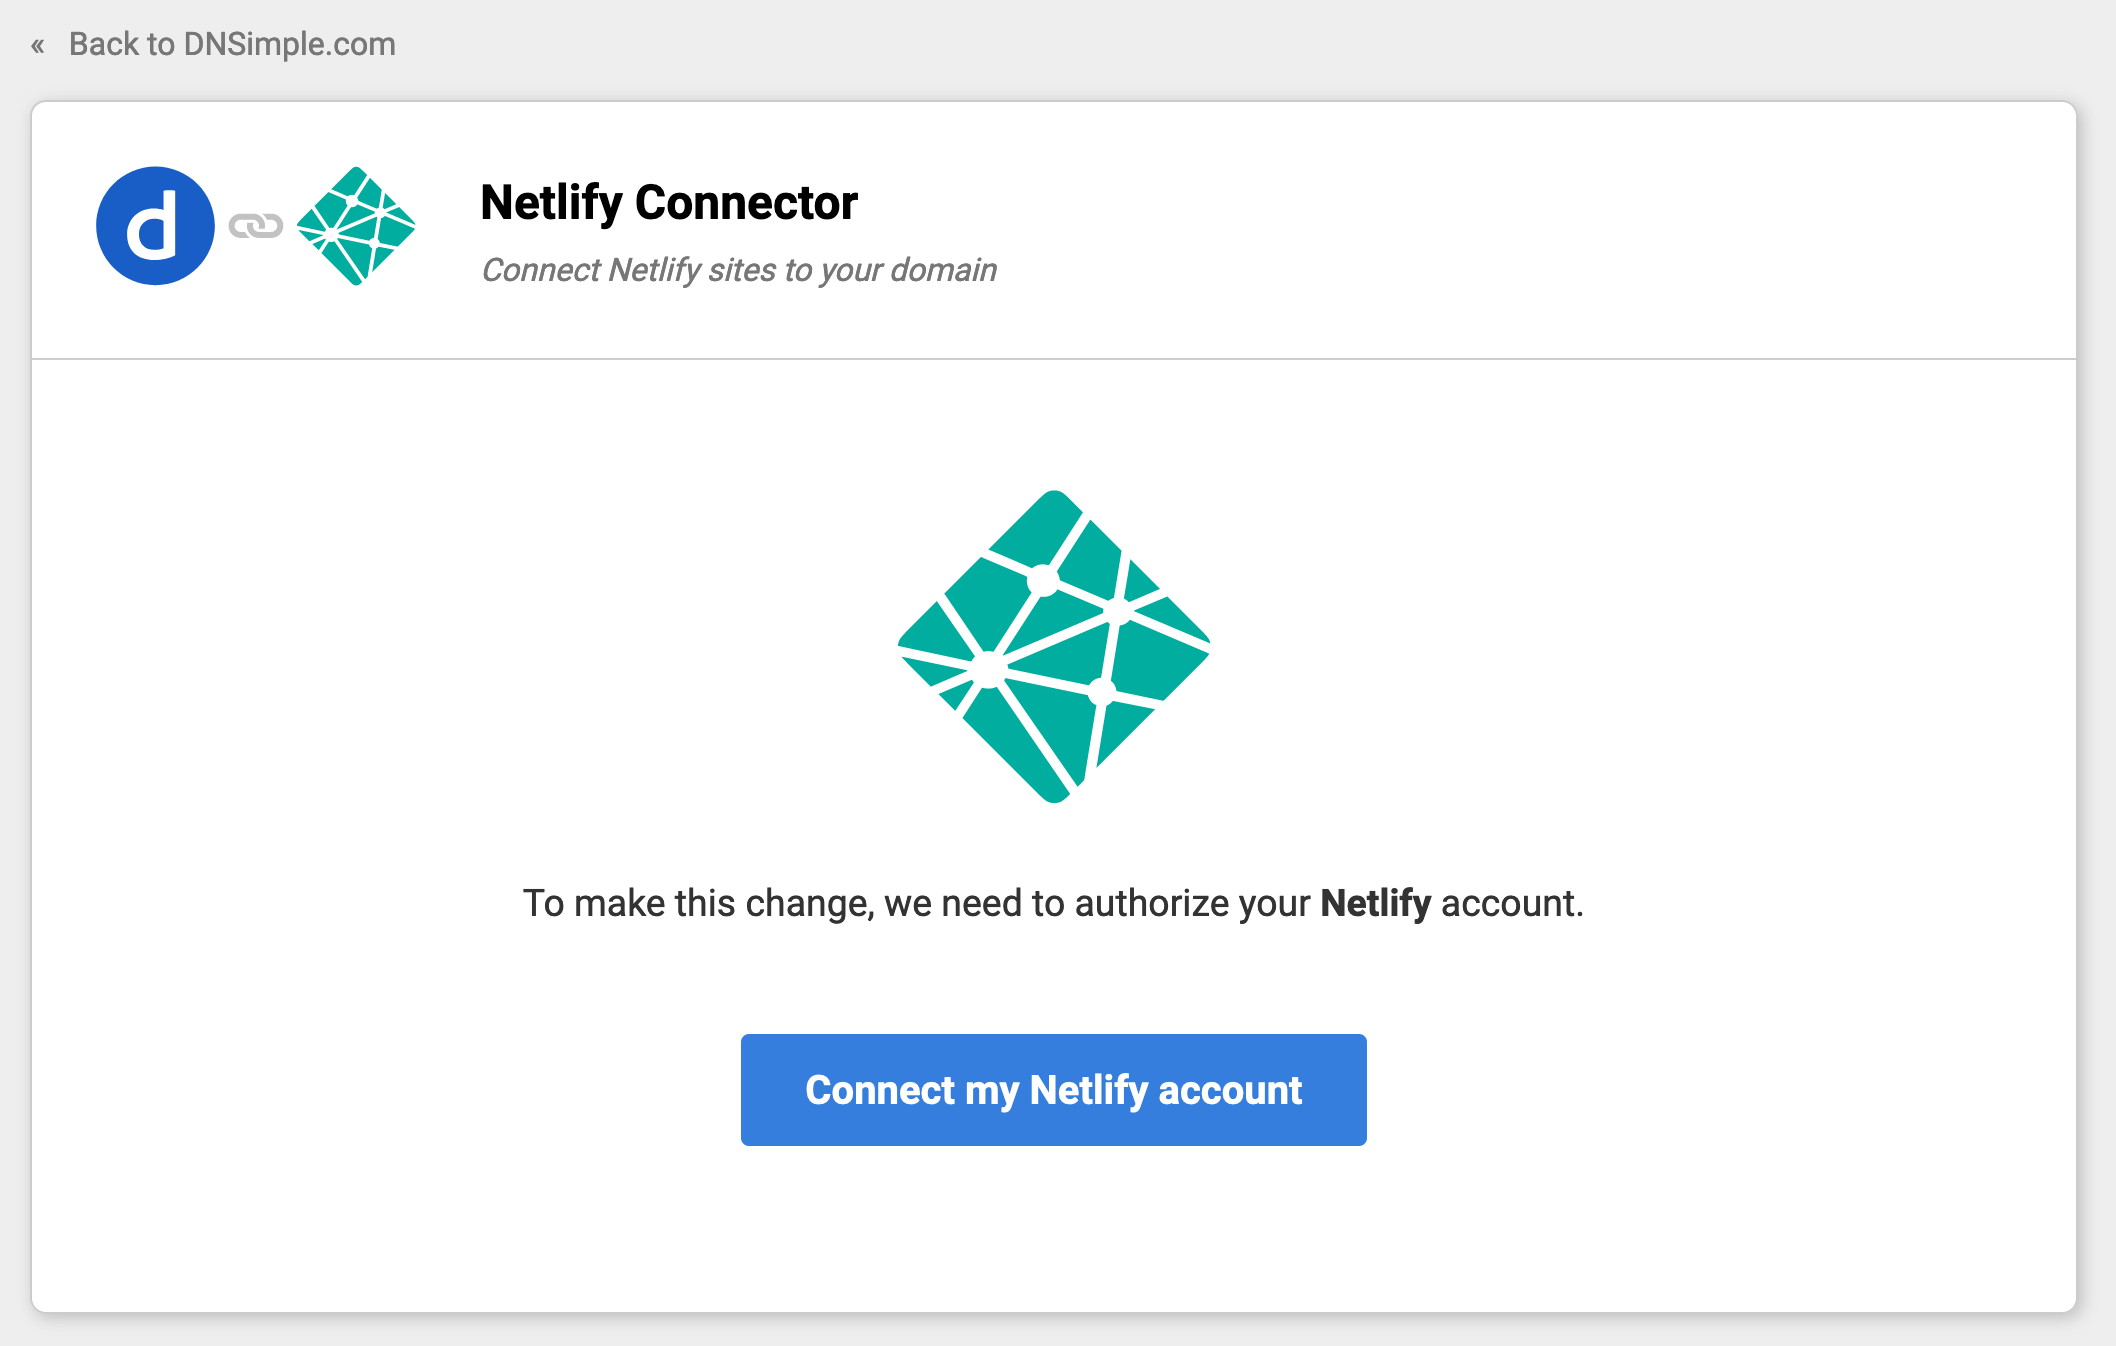 Authorize your Netlify account